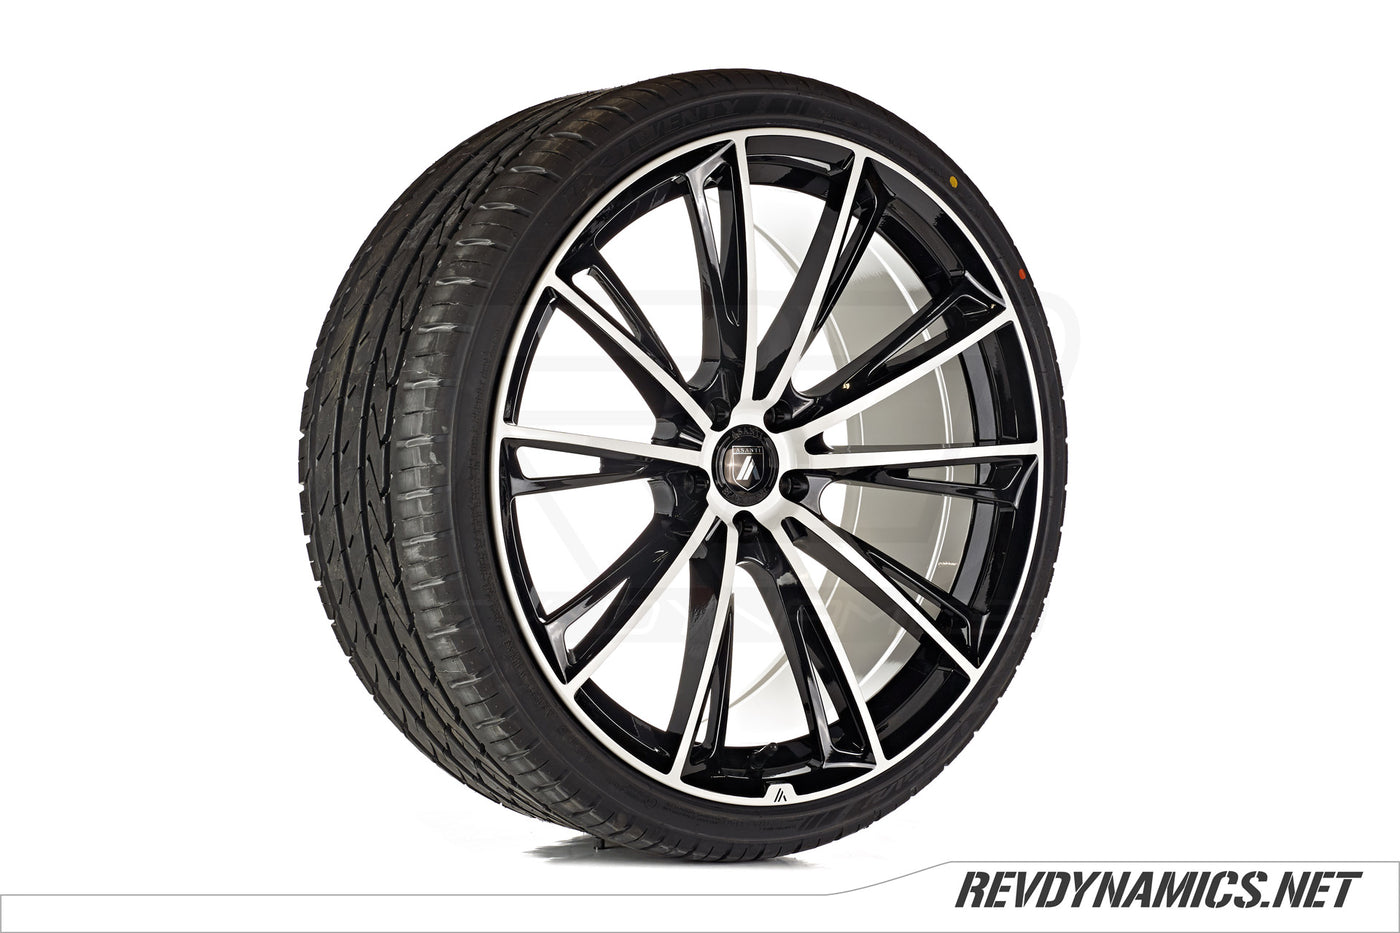 Asanti 22" Wheel with Lexani Tire custom painted in Black and White